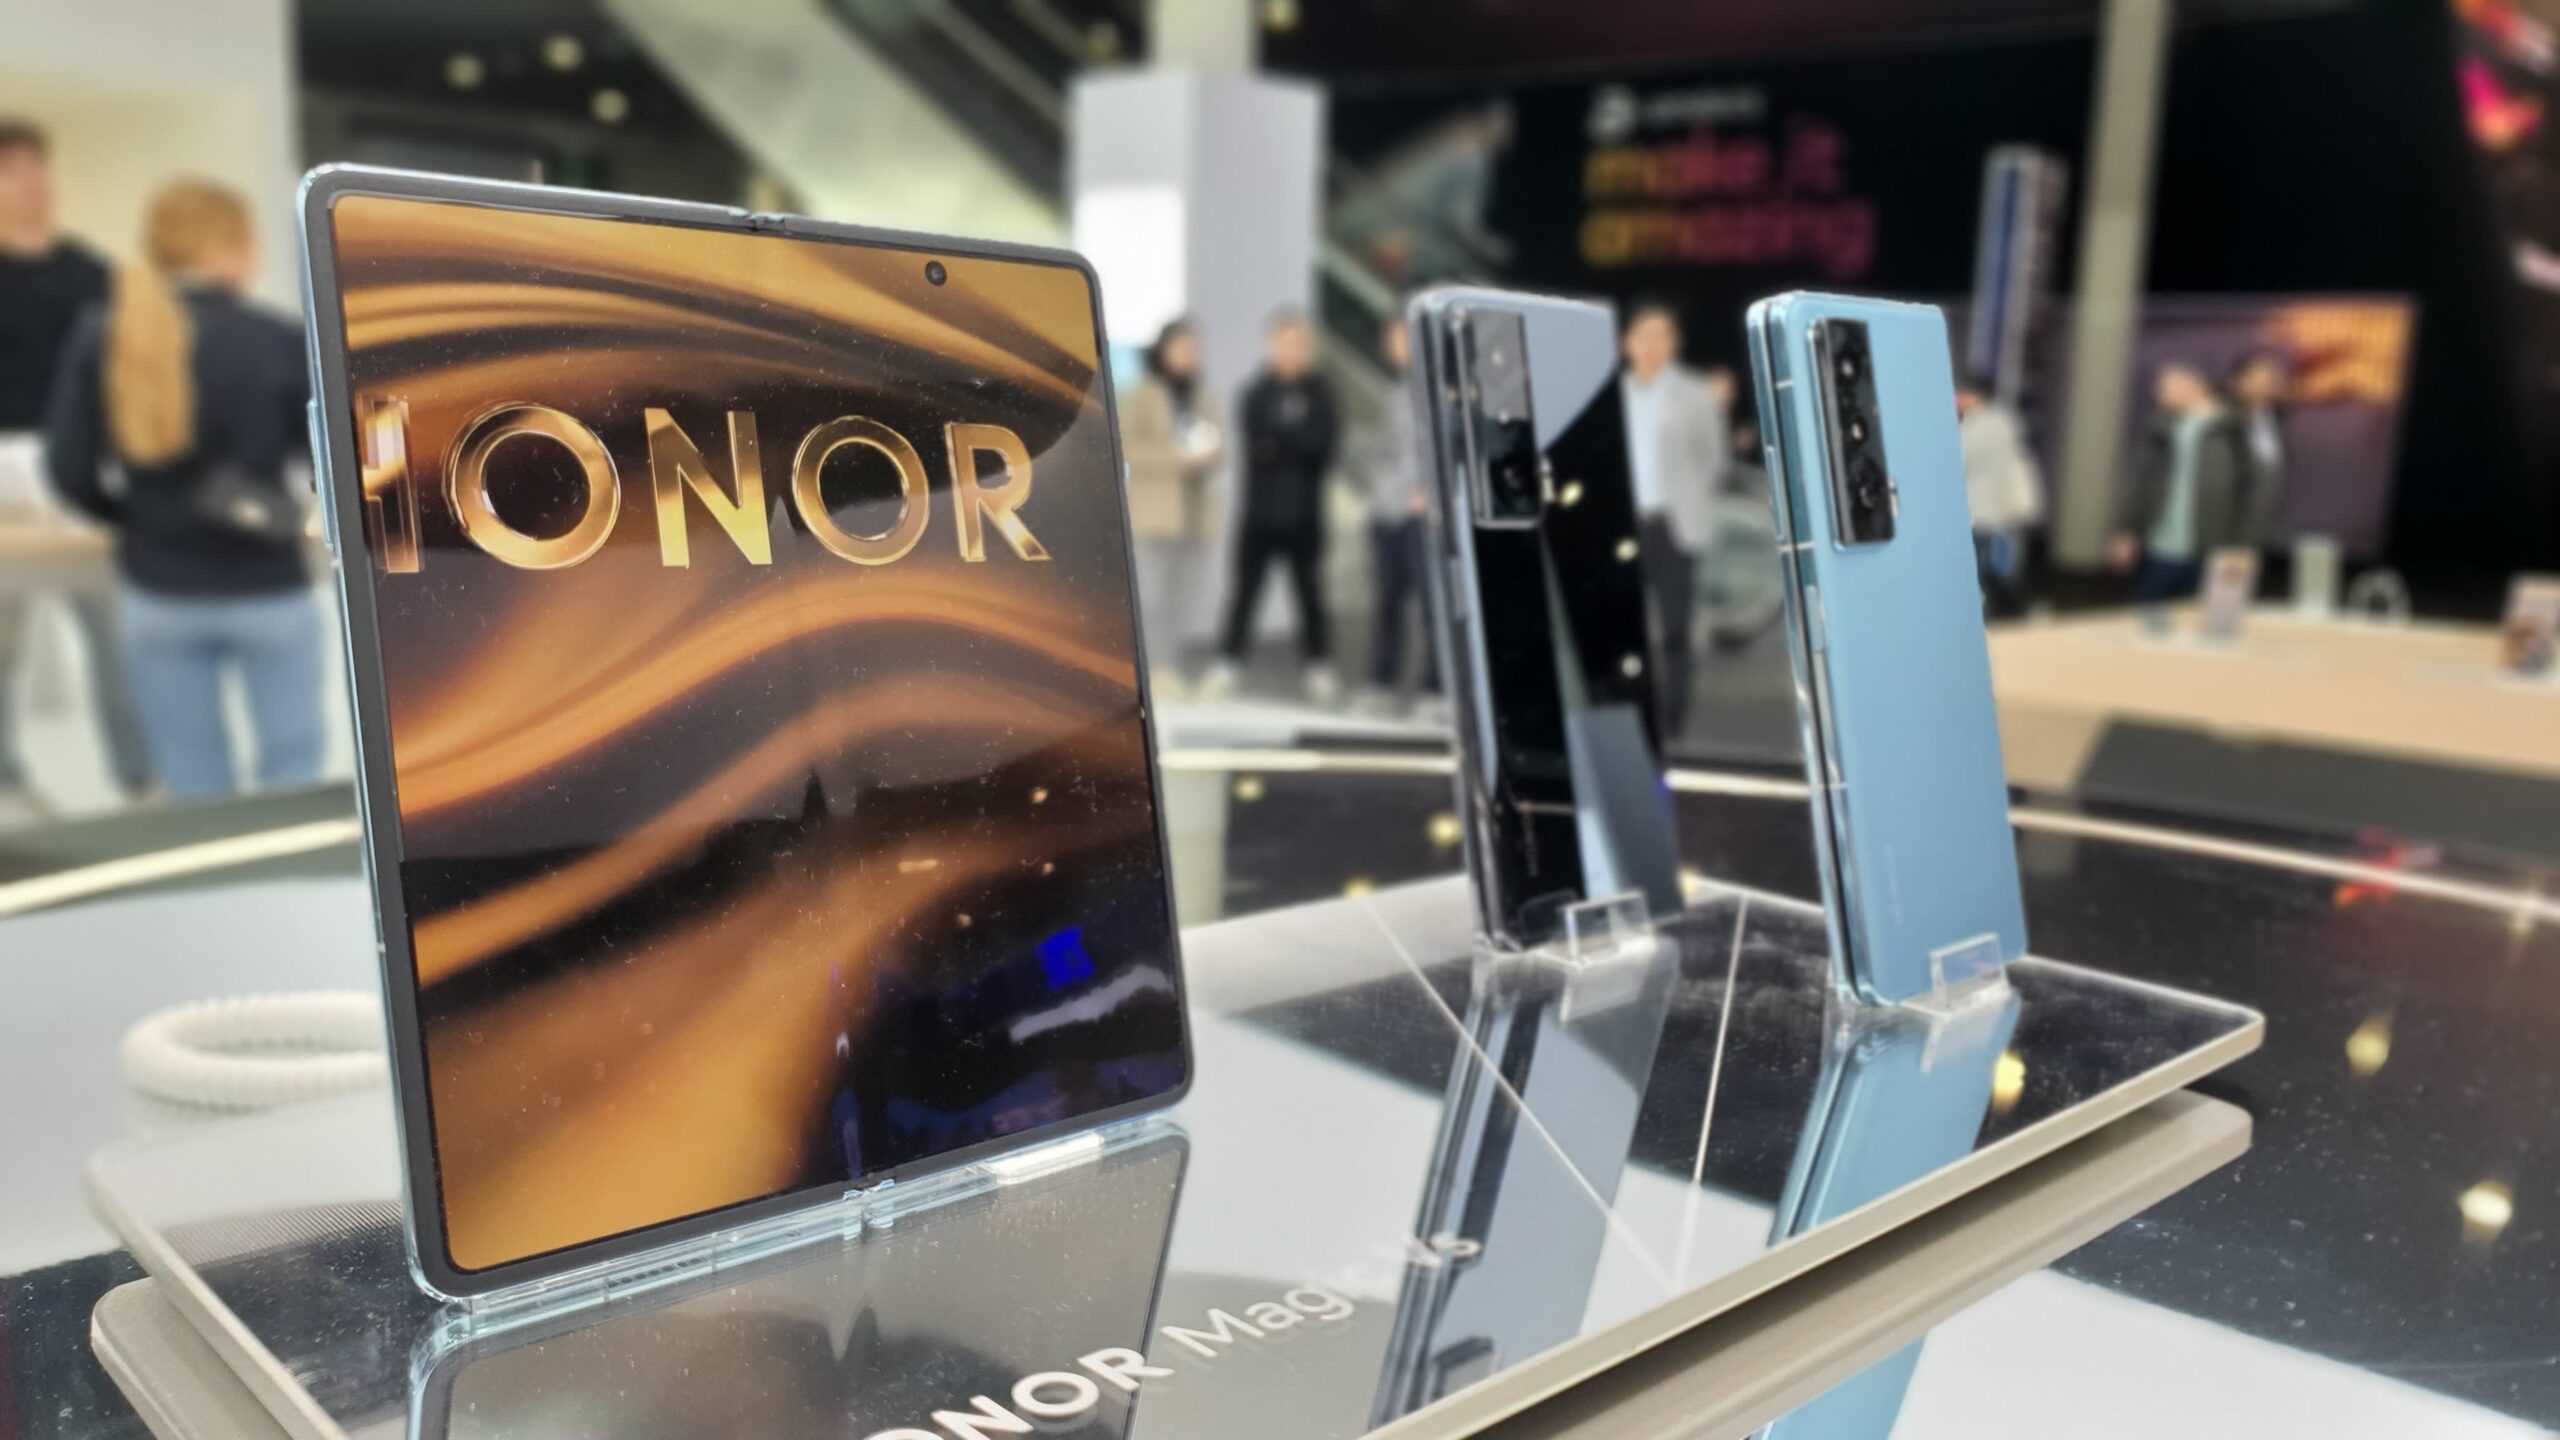 Honor, Huawei’s spinoff, developing smart ring post-Samsung debut.